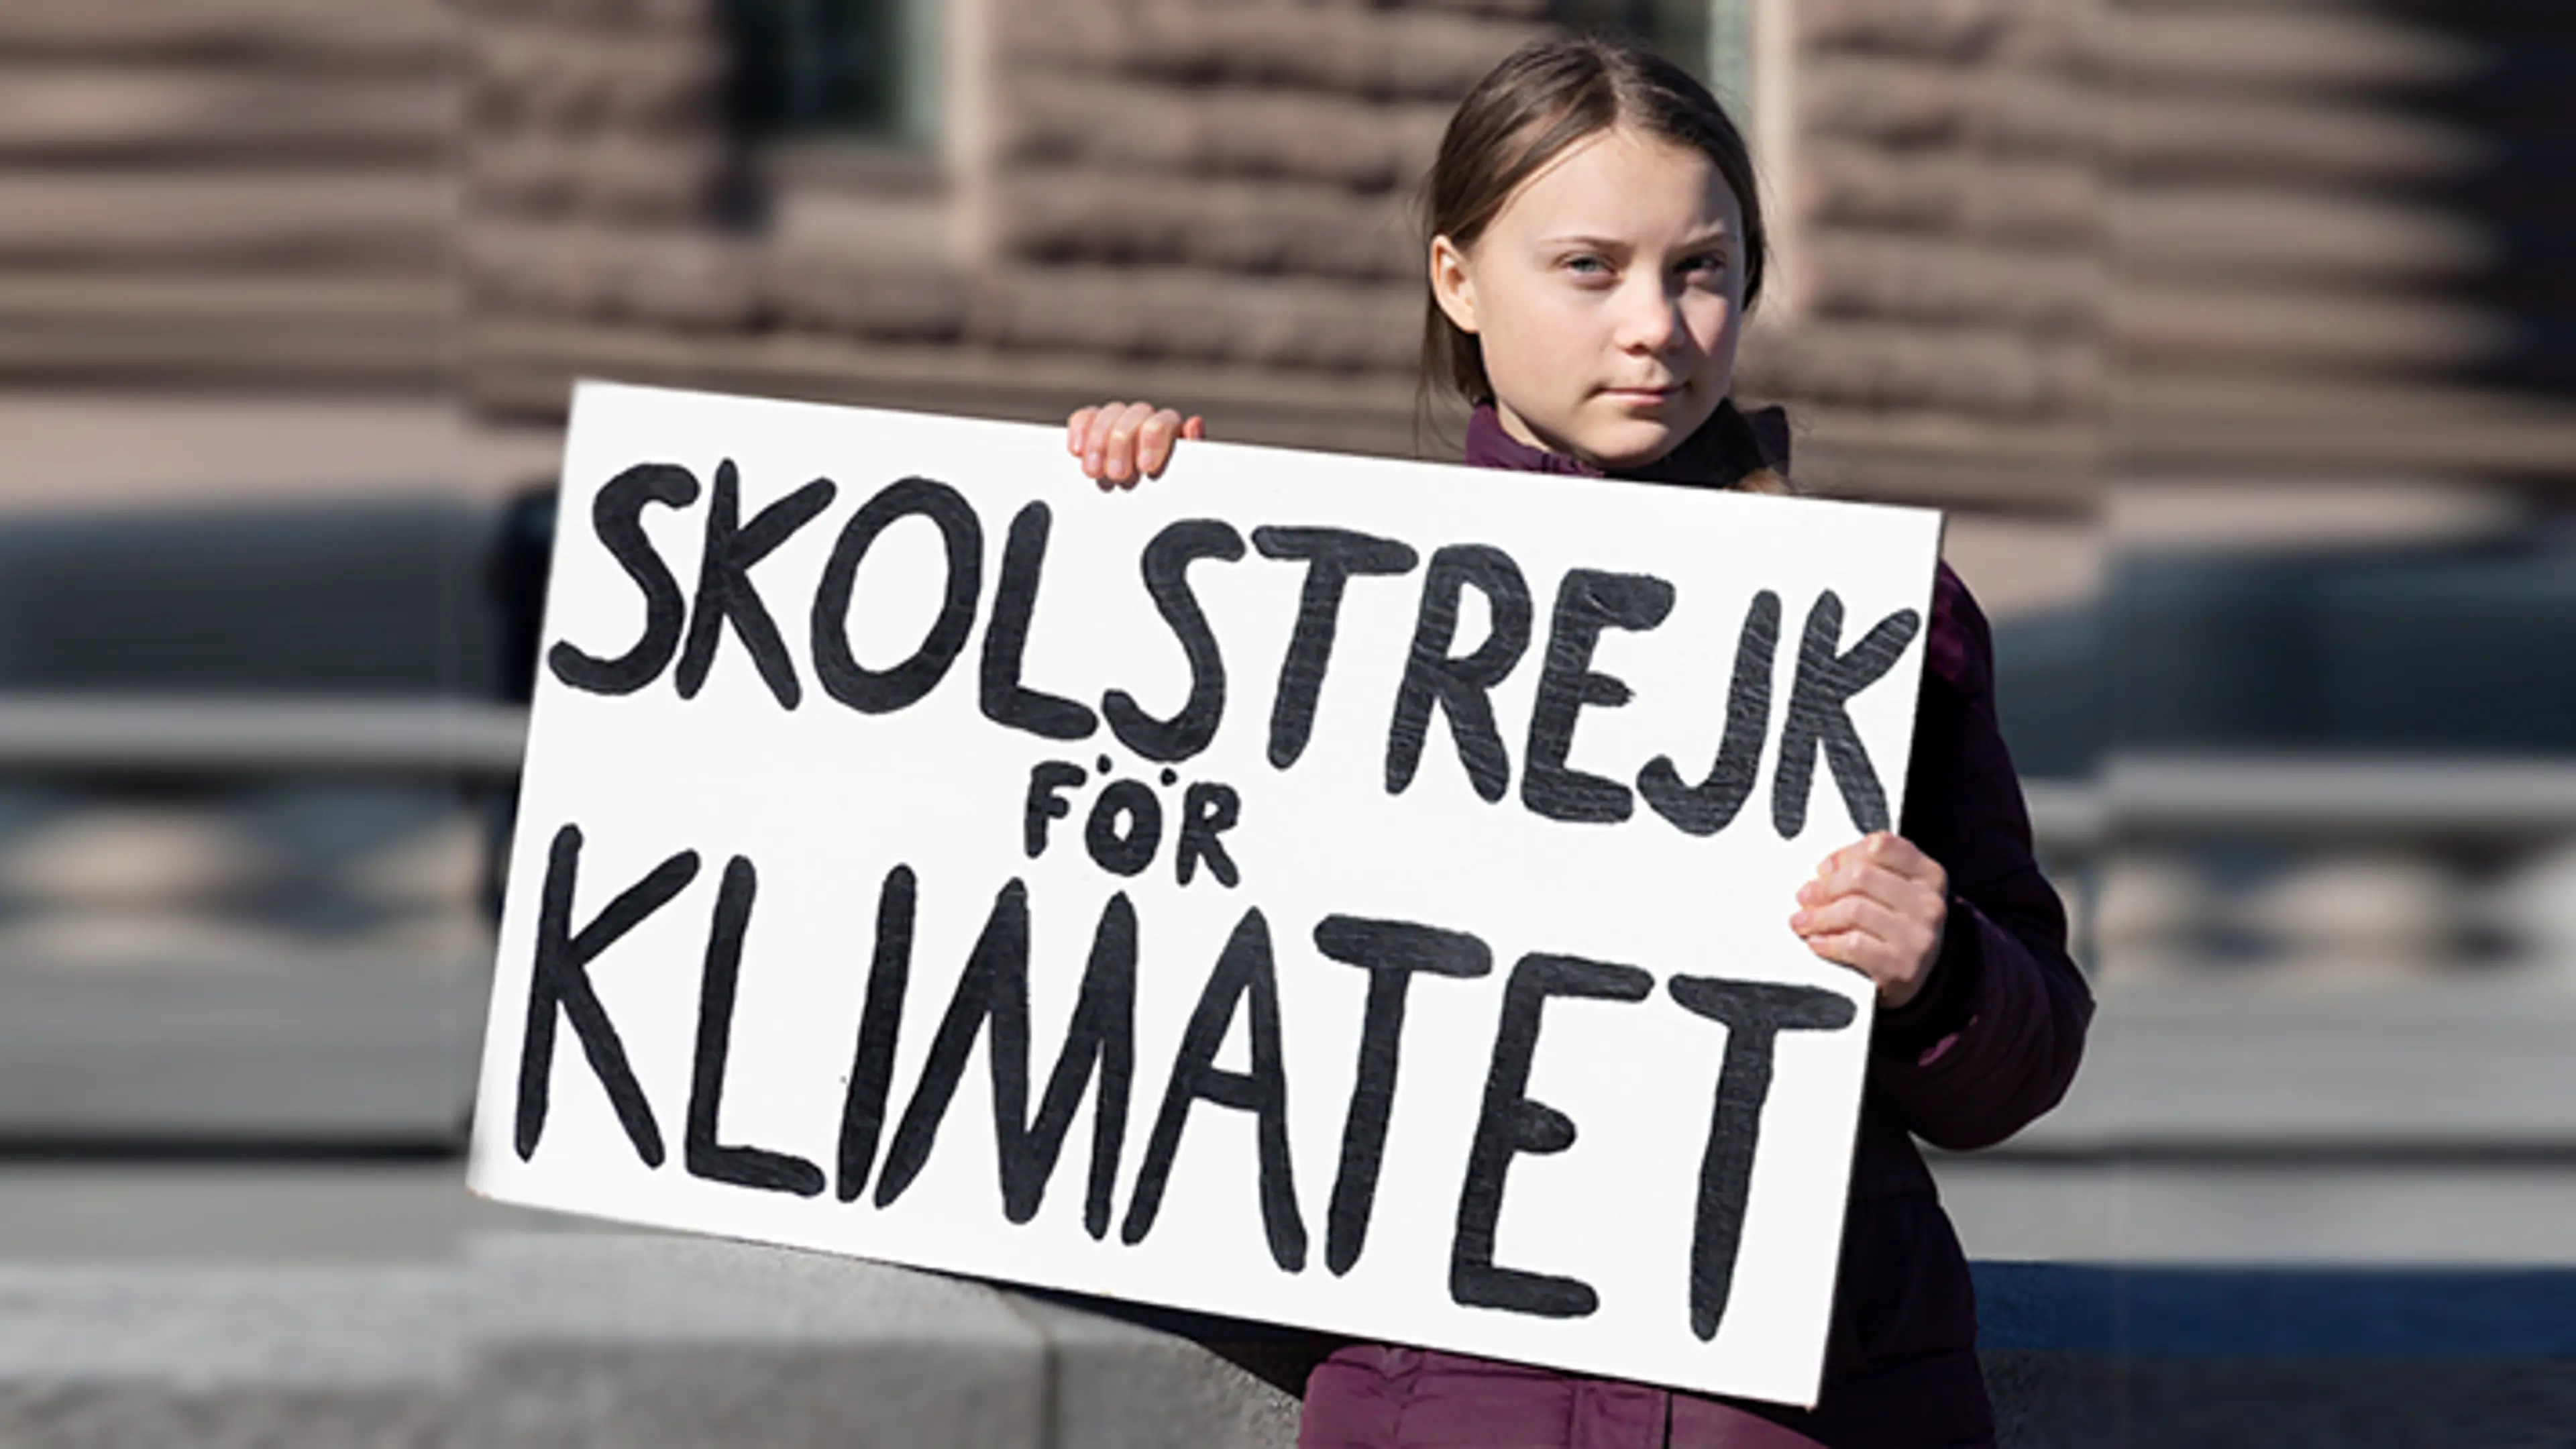 'A lot has happened, but nothing has been done as yet': Greta Thunberg